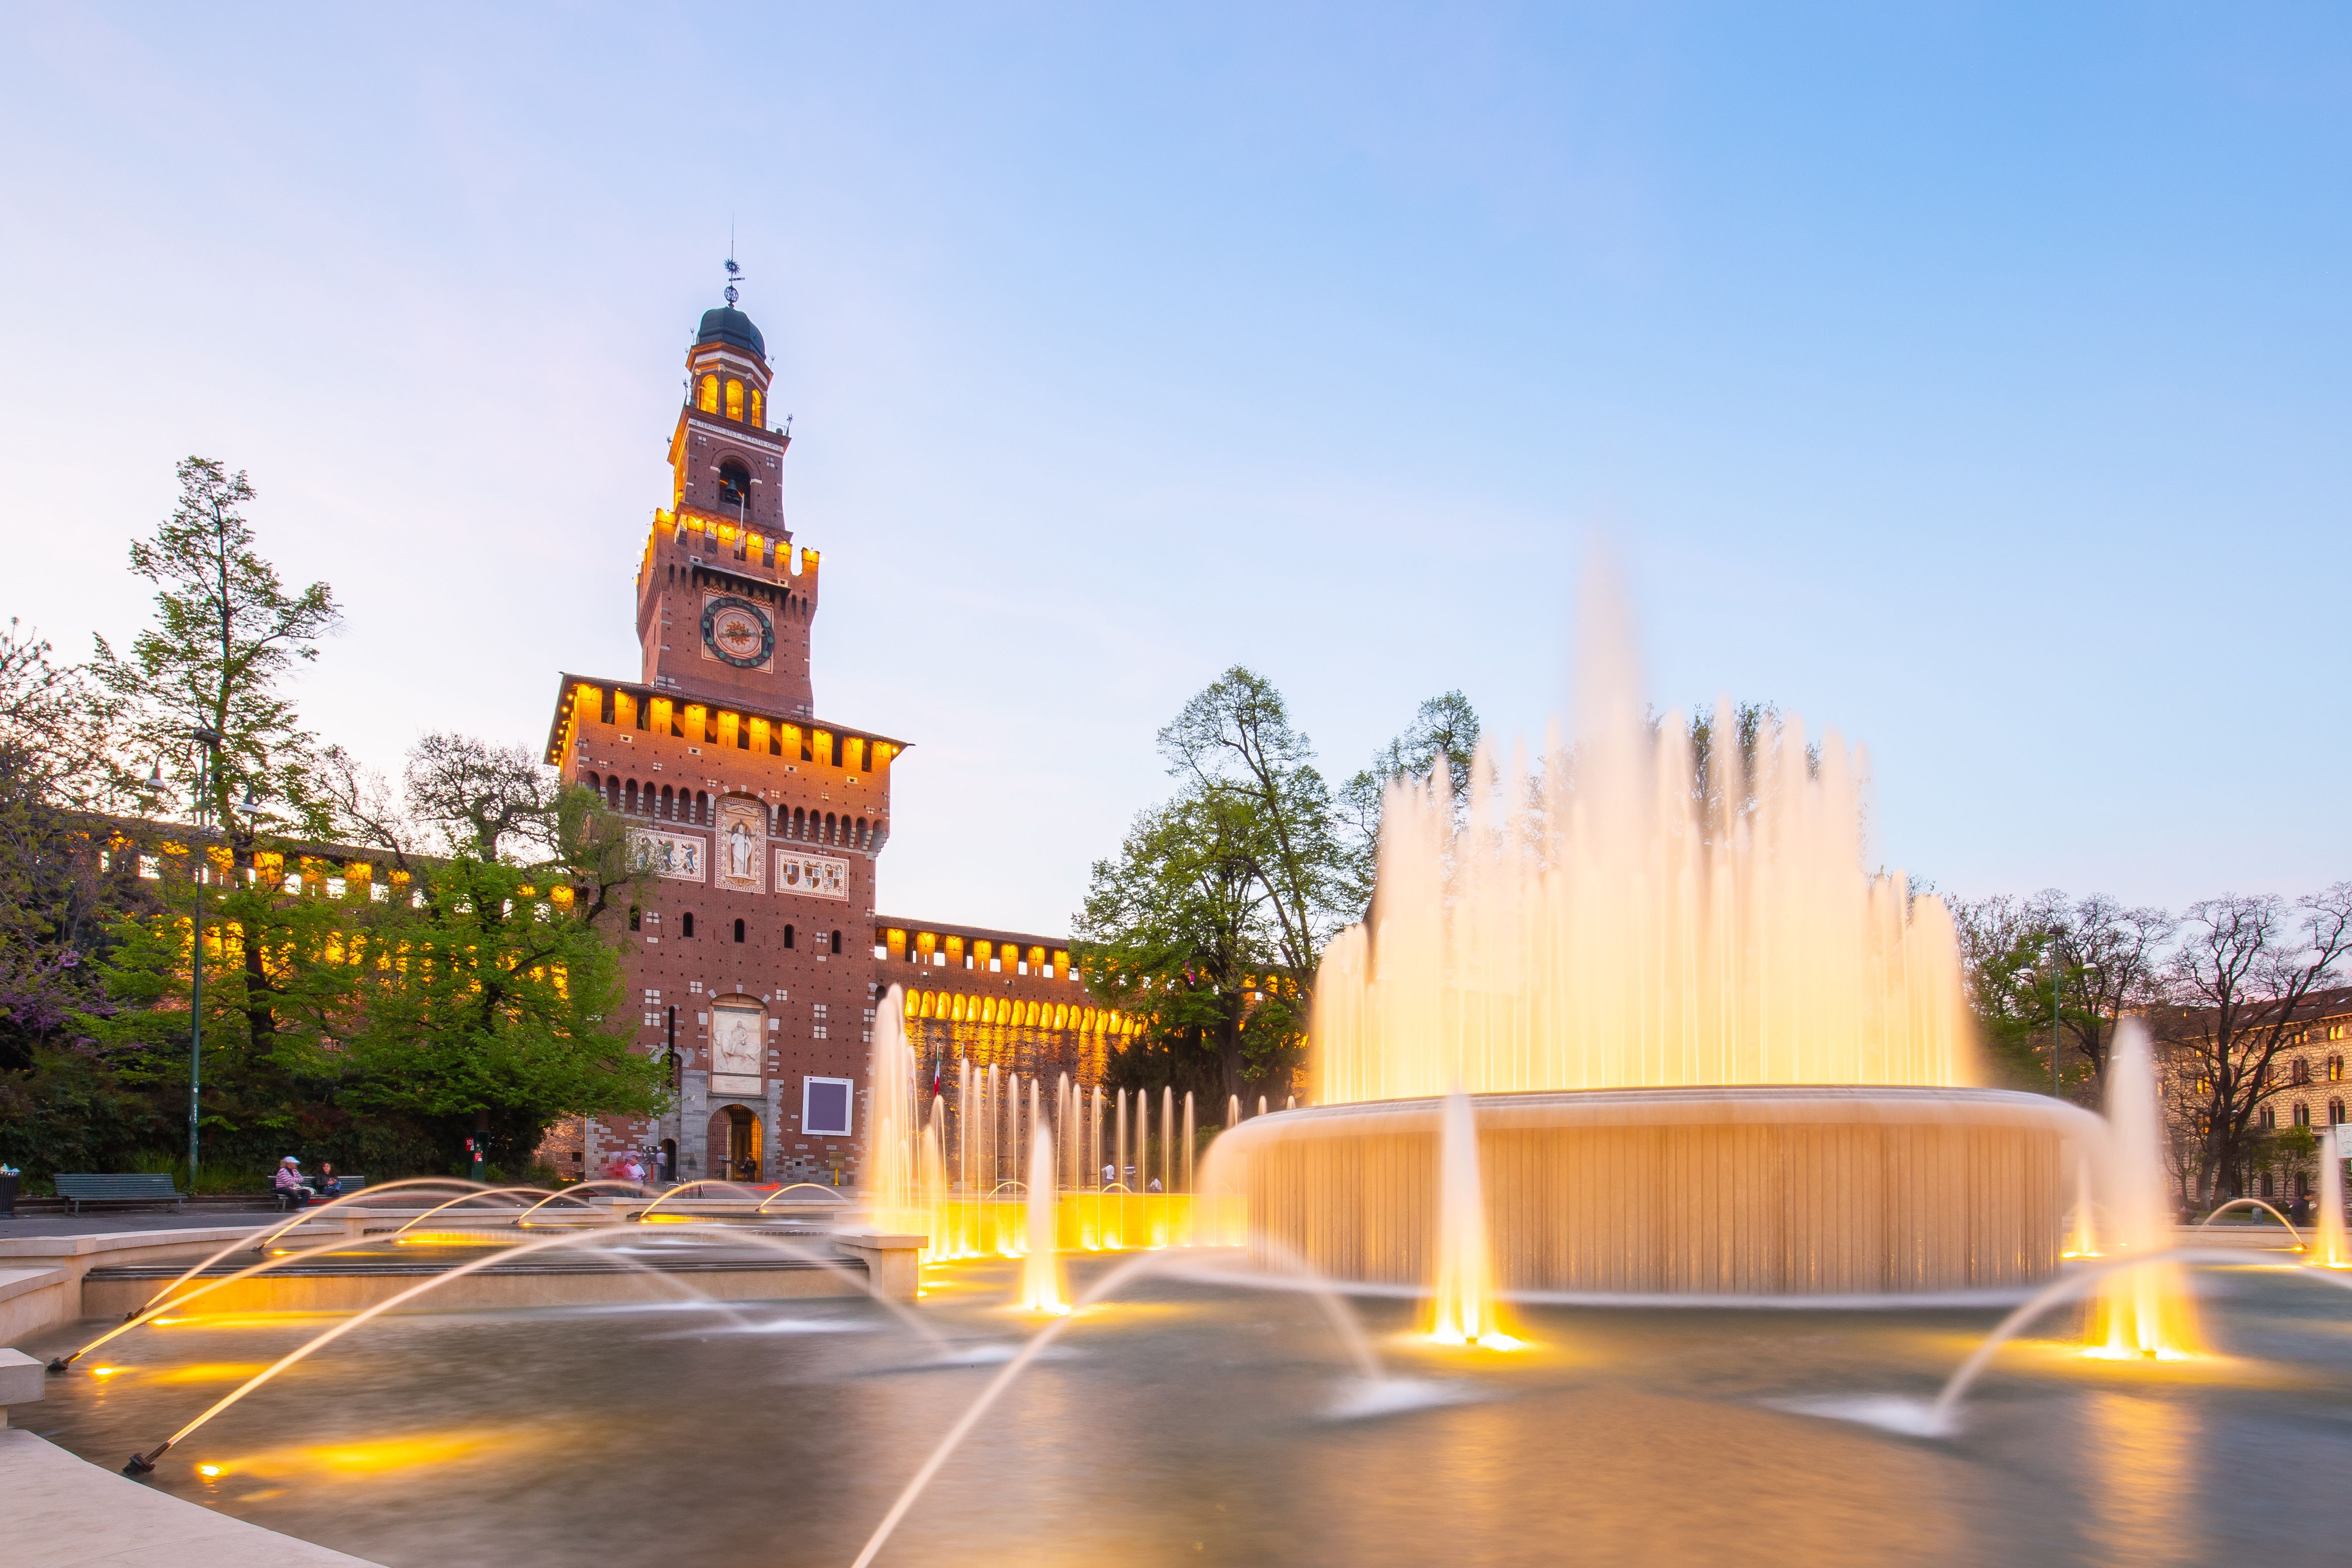 A water fountain n front of Sforza Castle in Milan, Italy